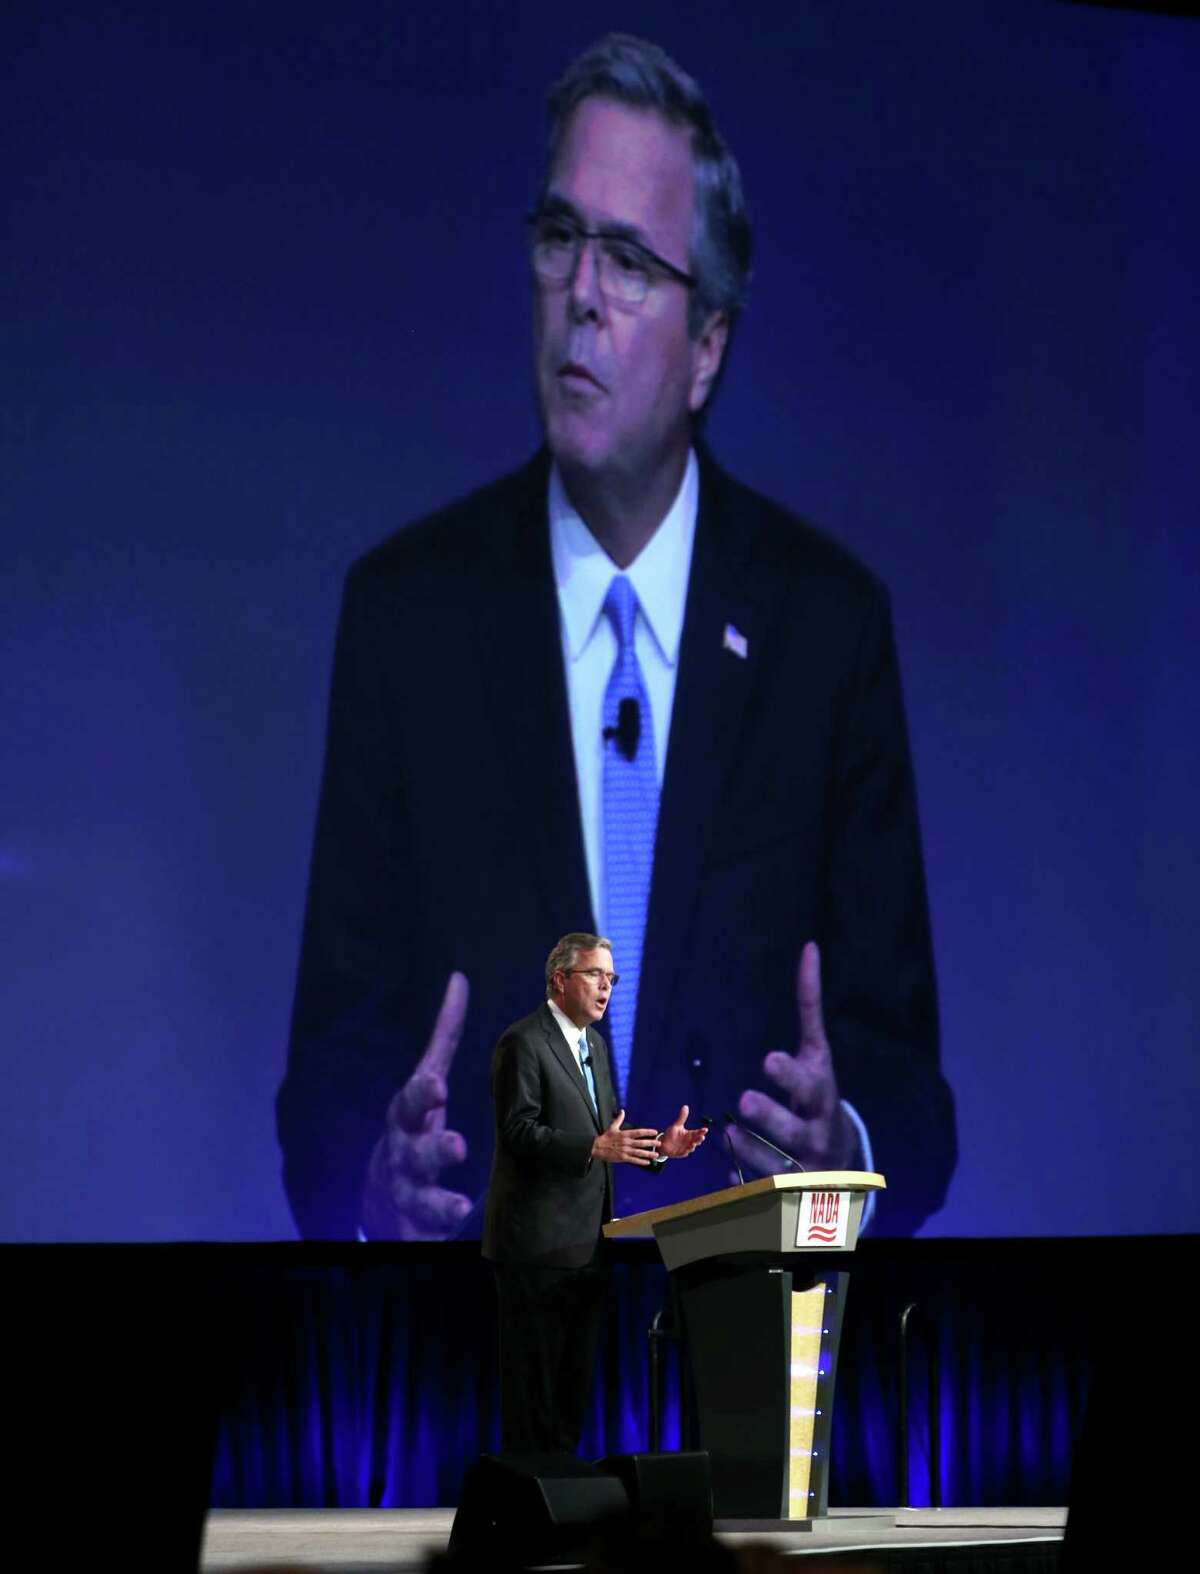 Former Florida Gov. Jeb Bush delivers the keynote speech at the National Automobile Dealers Association convention at Moscone Center in San Francisco, Calif. on Friday, Jan. 23, 2015. Bush is exploring a potential run for the presidency in 2016.